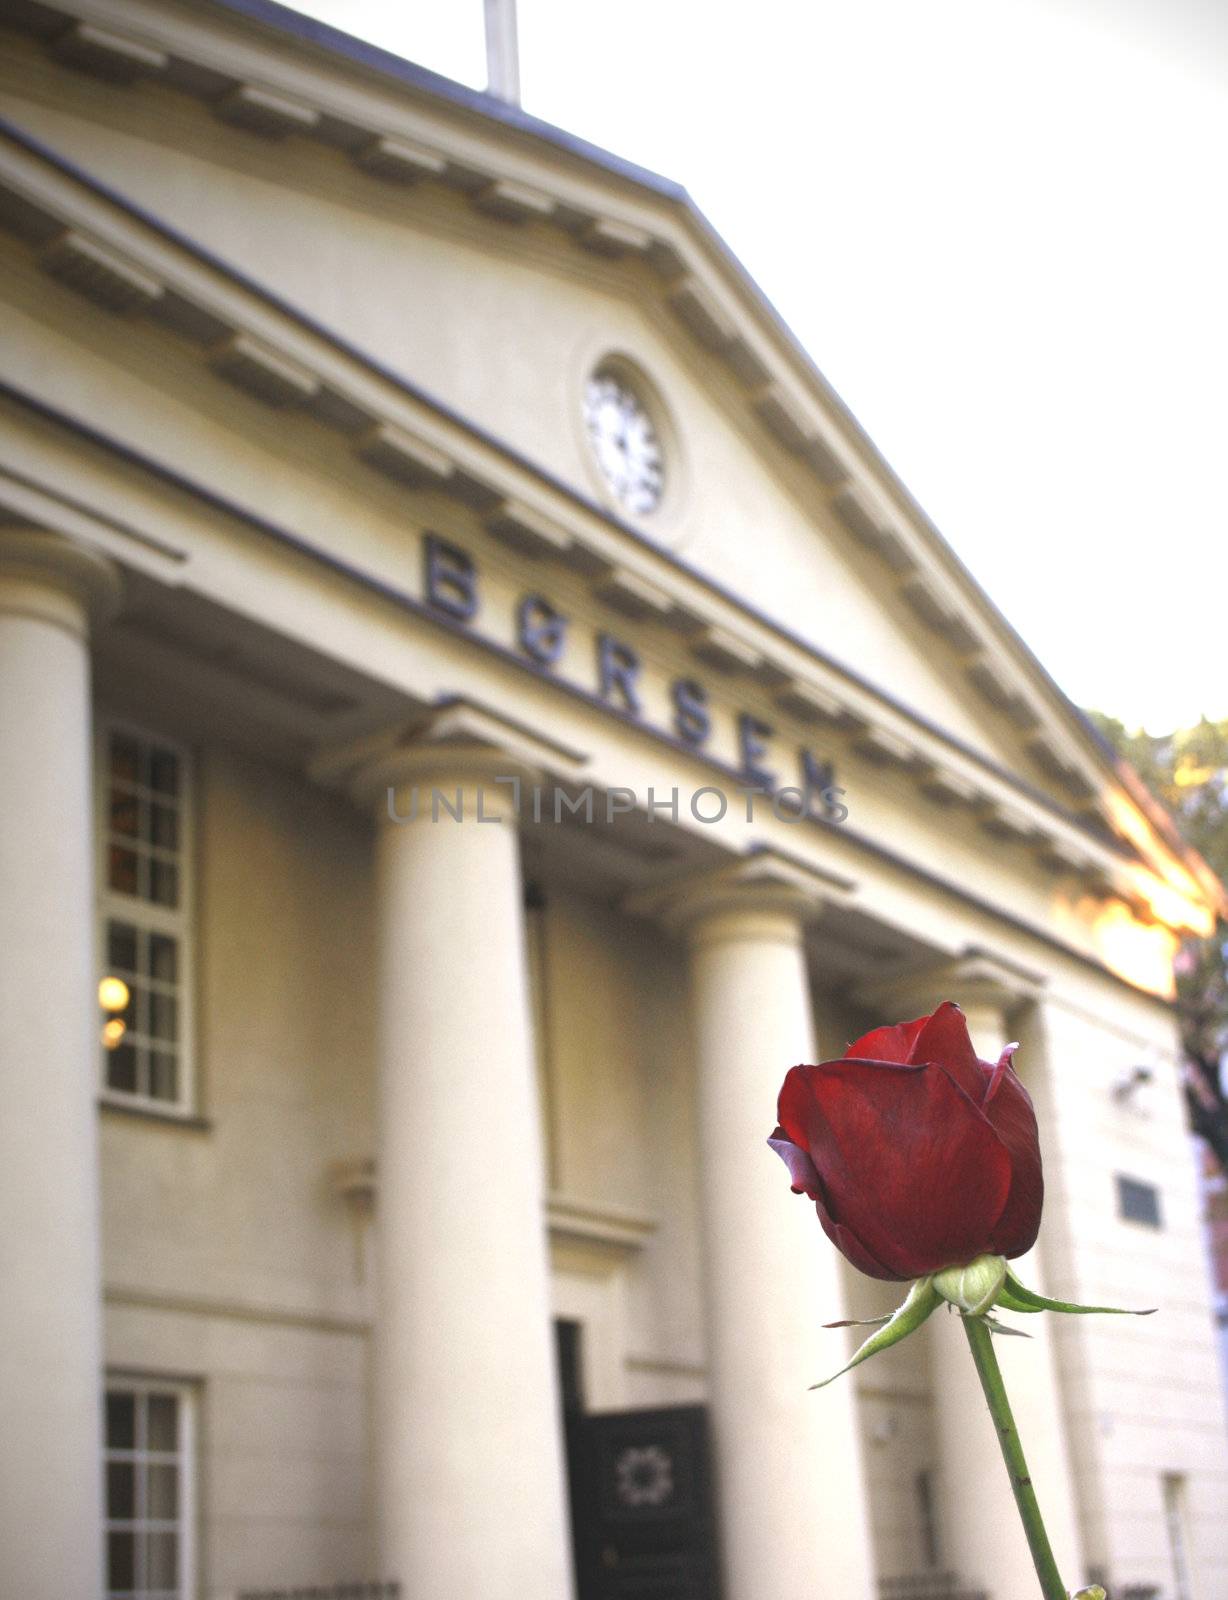 A rose in front of Oslo stock exchange